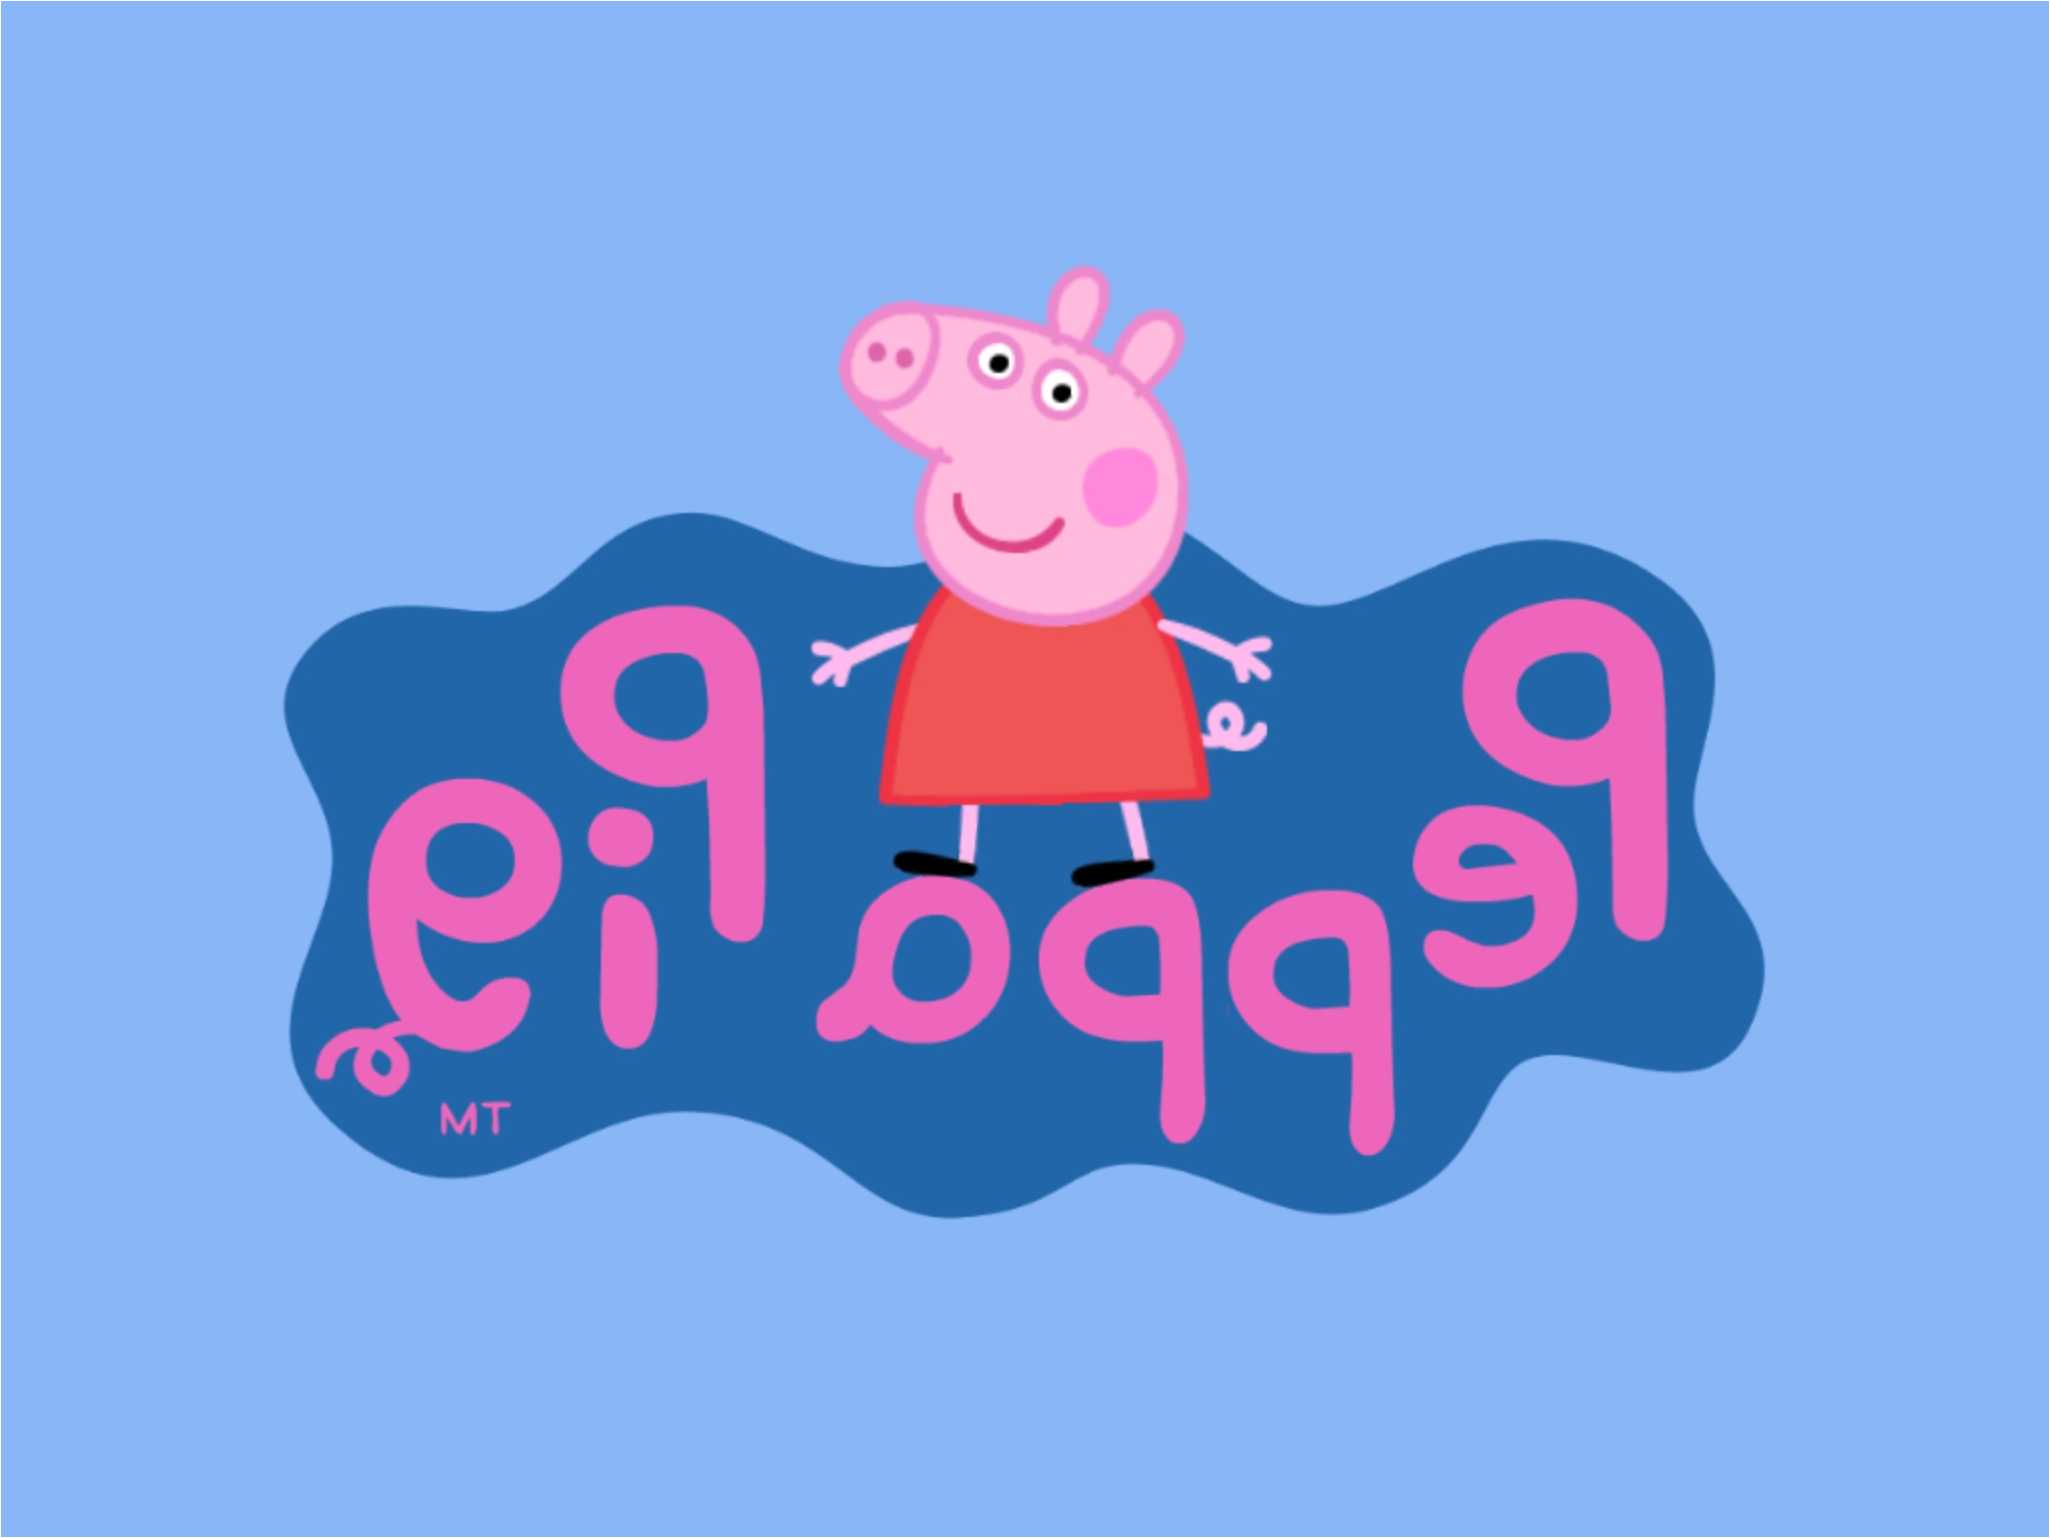 Awesome Hd Quality Backgrounds Of Peppa Pig, Full Hd - Peppa Pig -  2050x1538 Wallpaper 